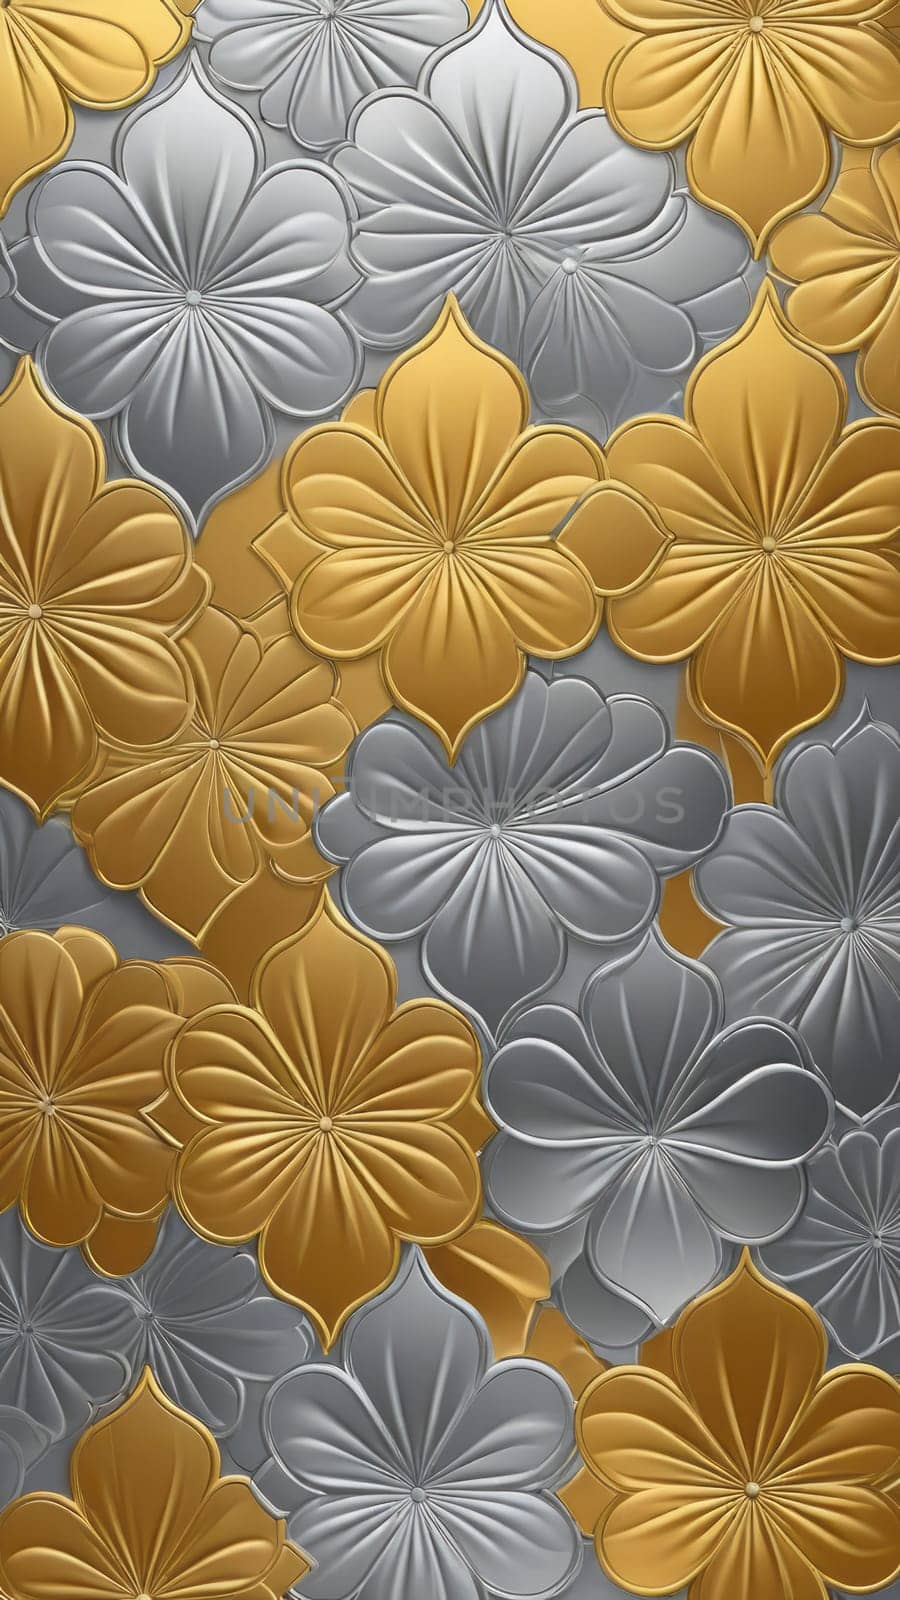 Background from Quatrefoil shapes and silver by nkotlyar